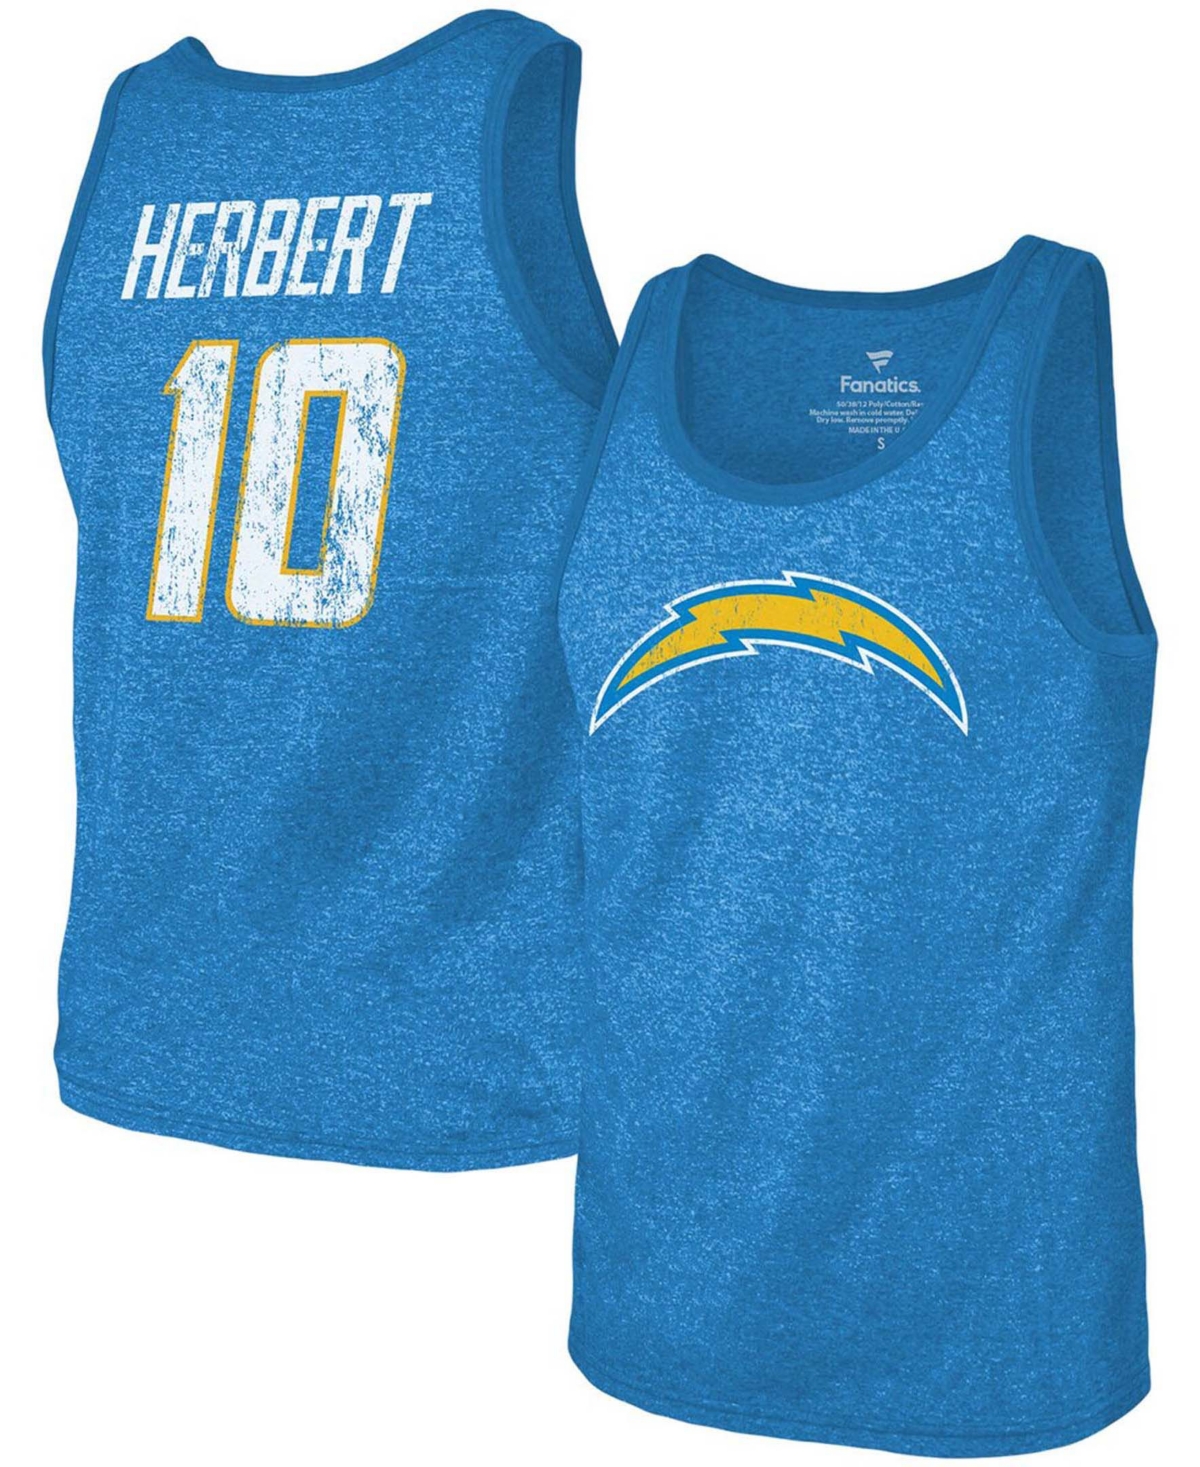 Fanatics Men's Justin Herbert Heathered Powder Blue Los Angeles Chargers Name Number Tri-blend Tank Top